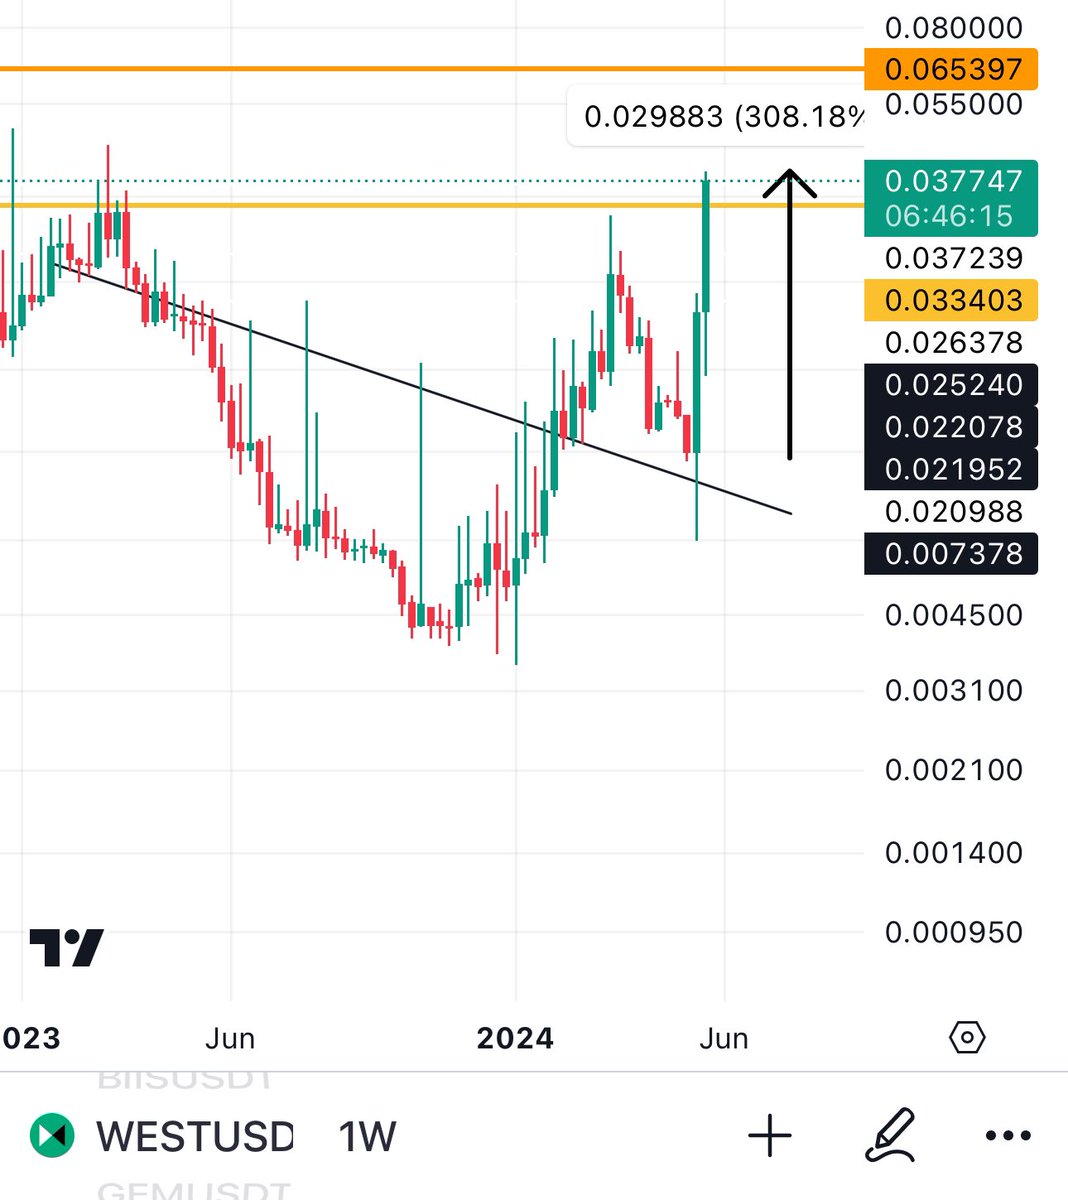 $WEST is up massively about 308% & approaching to marked final level of 500% profit 🔥

It should go more as it’s breaking above with power. 

Patience is money & good gains come with patience. 

- Like & RT for next 👍